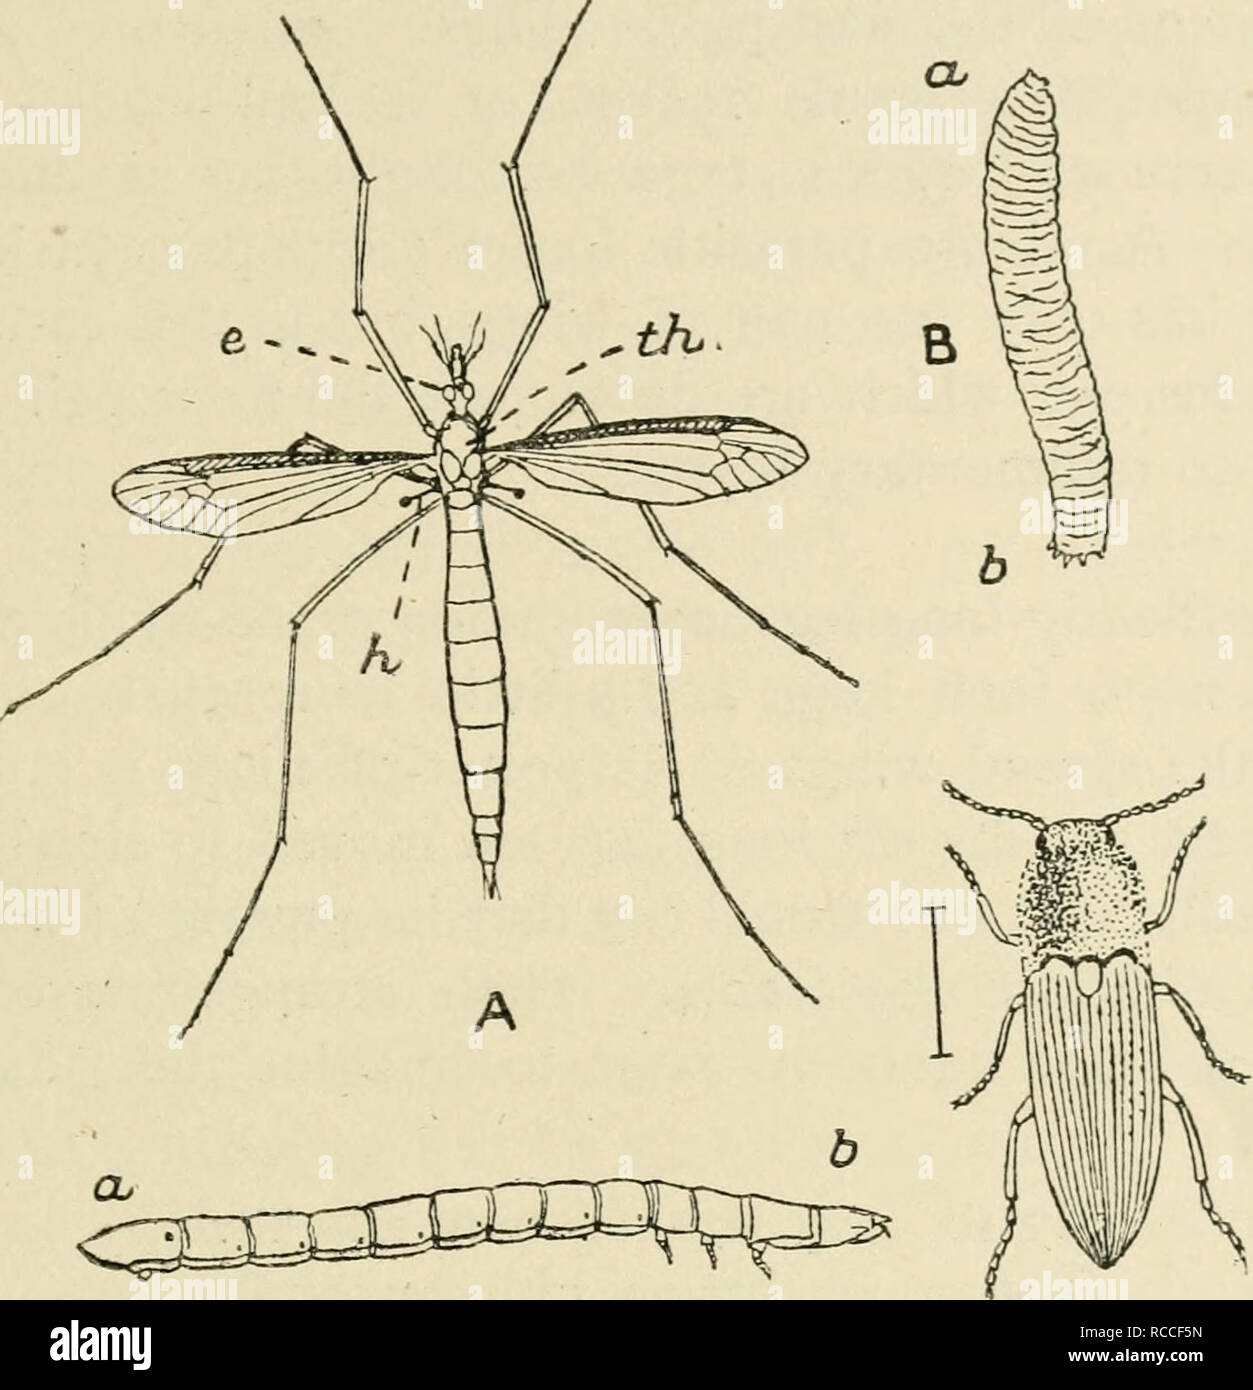 . Diversions of a naturalist. Natural history. DADDY-LONG-LEGS 217 size, are present in them in a very much dwindled condi- tion. Since most of our common flies are very small it is. D ^ Fig. 22. A, The Crane-fly (Daddy-Long-Legs), Tipula oleracea. e, the left eye ; h, one of the balancers or &quot; halteres,&quot; which are th, the thorax. Natural the modified second pair of wings ; head B, The &quot;Leather-jacket,&quot; the grub of the crane-fly. b, tail. Natural size. C, The Click-beetle or Skip-jack, Elater obscurus. The line beside it shows its natural size. D, The true Wire-worm or grub Stock Photo